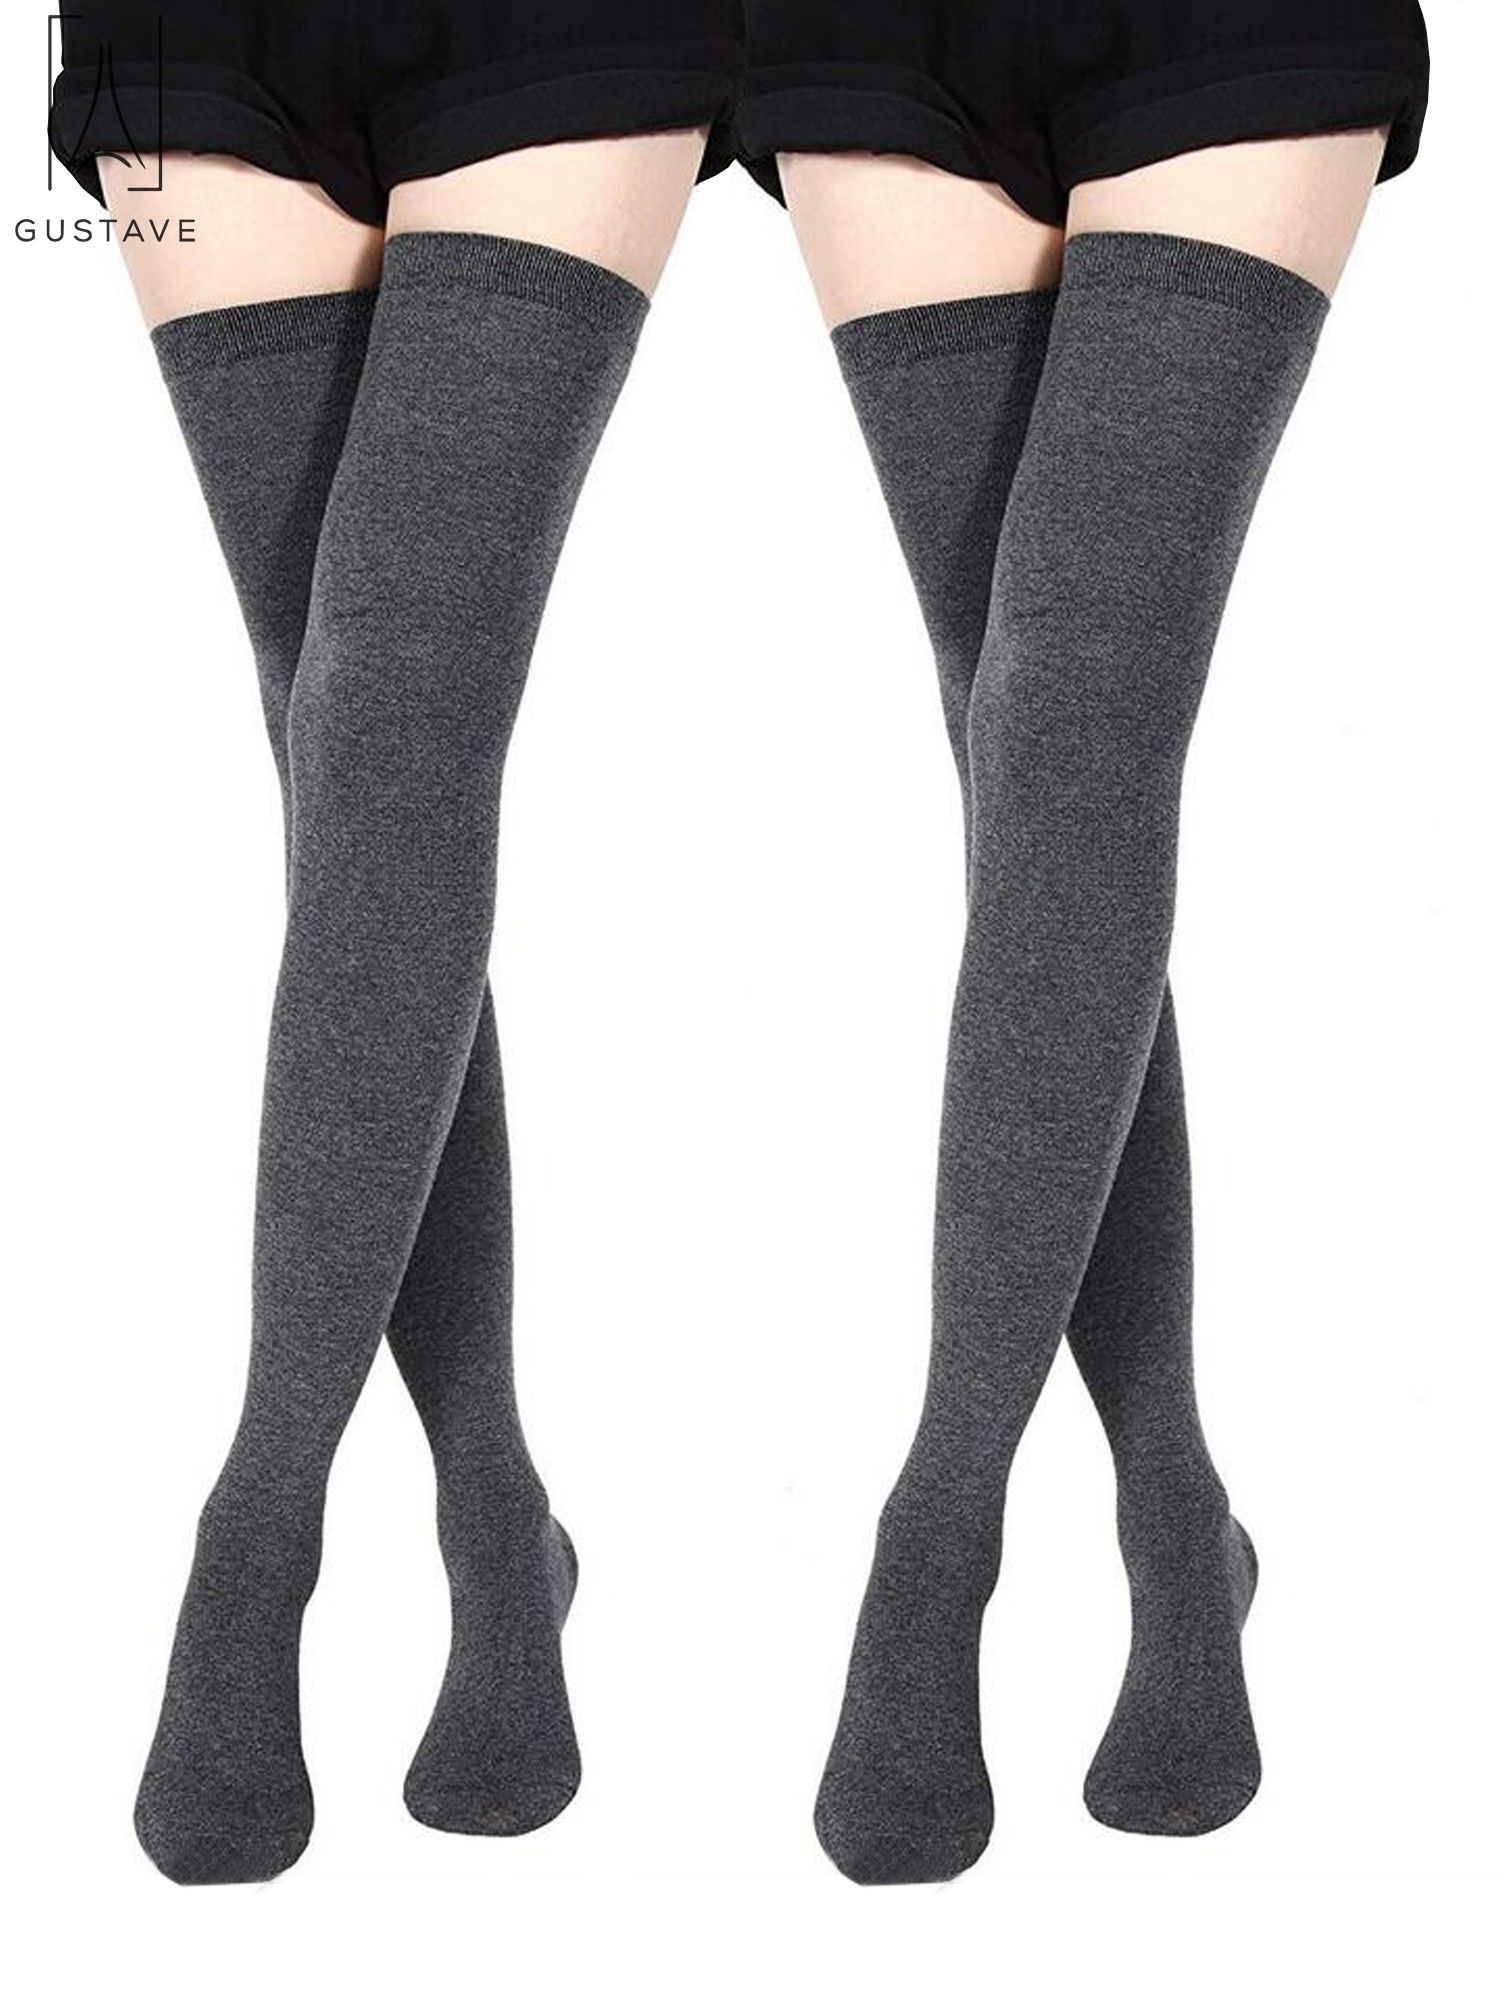 Gustave 2 Paris Women Girl Extra Long Fashion Thigh High Socks over the Knee High Boot Stockings Leg Warmers Lady Party Dress "Gray, 2 Pair" - image 4 of 10